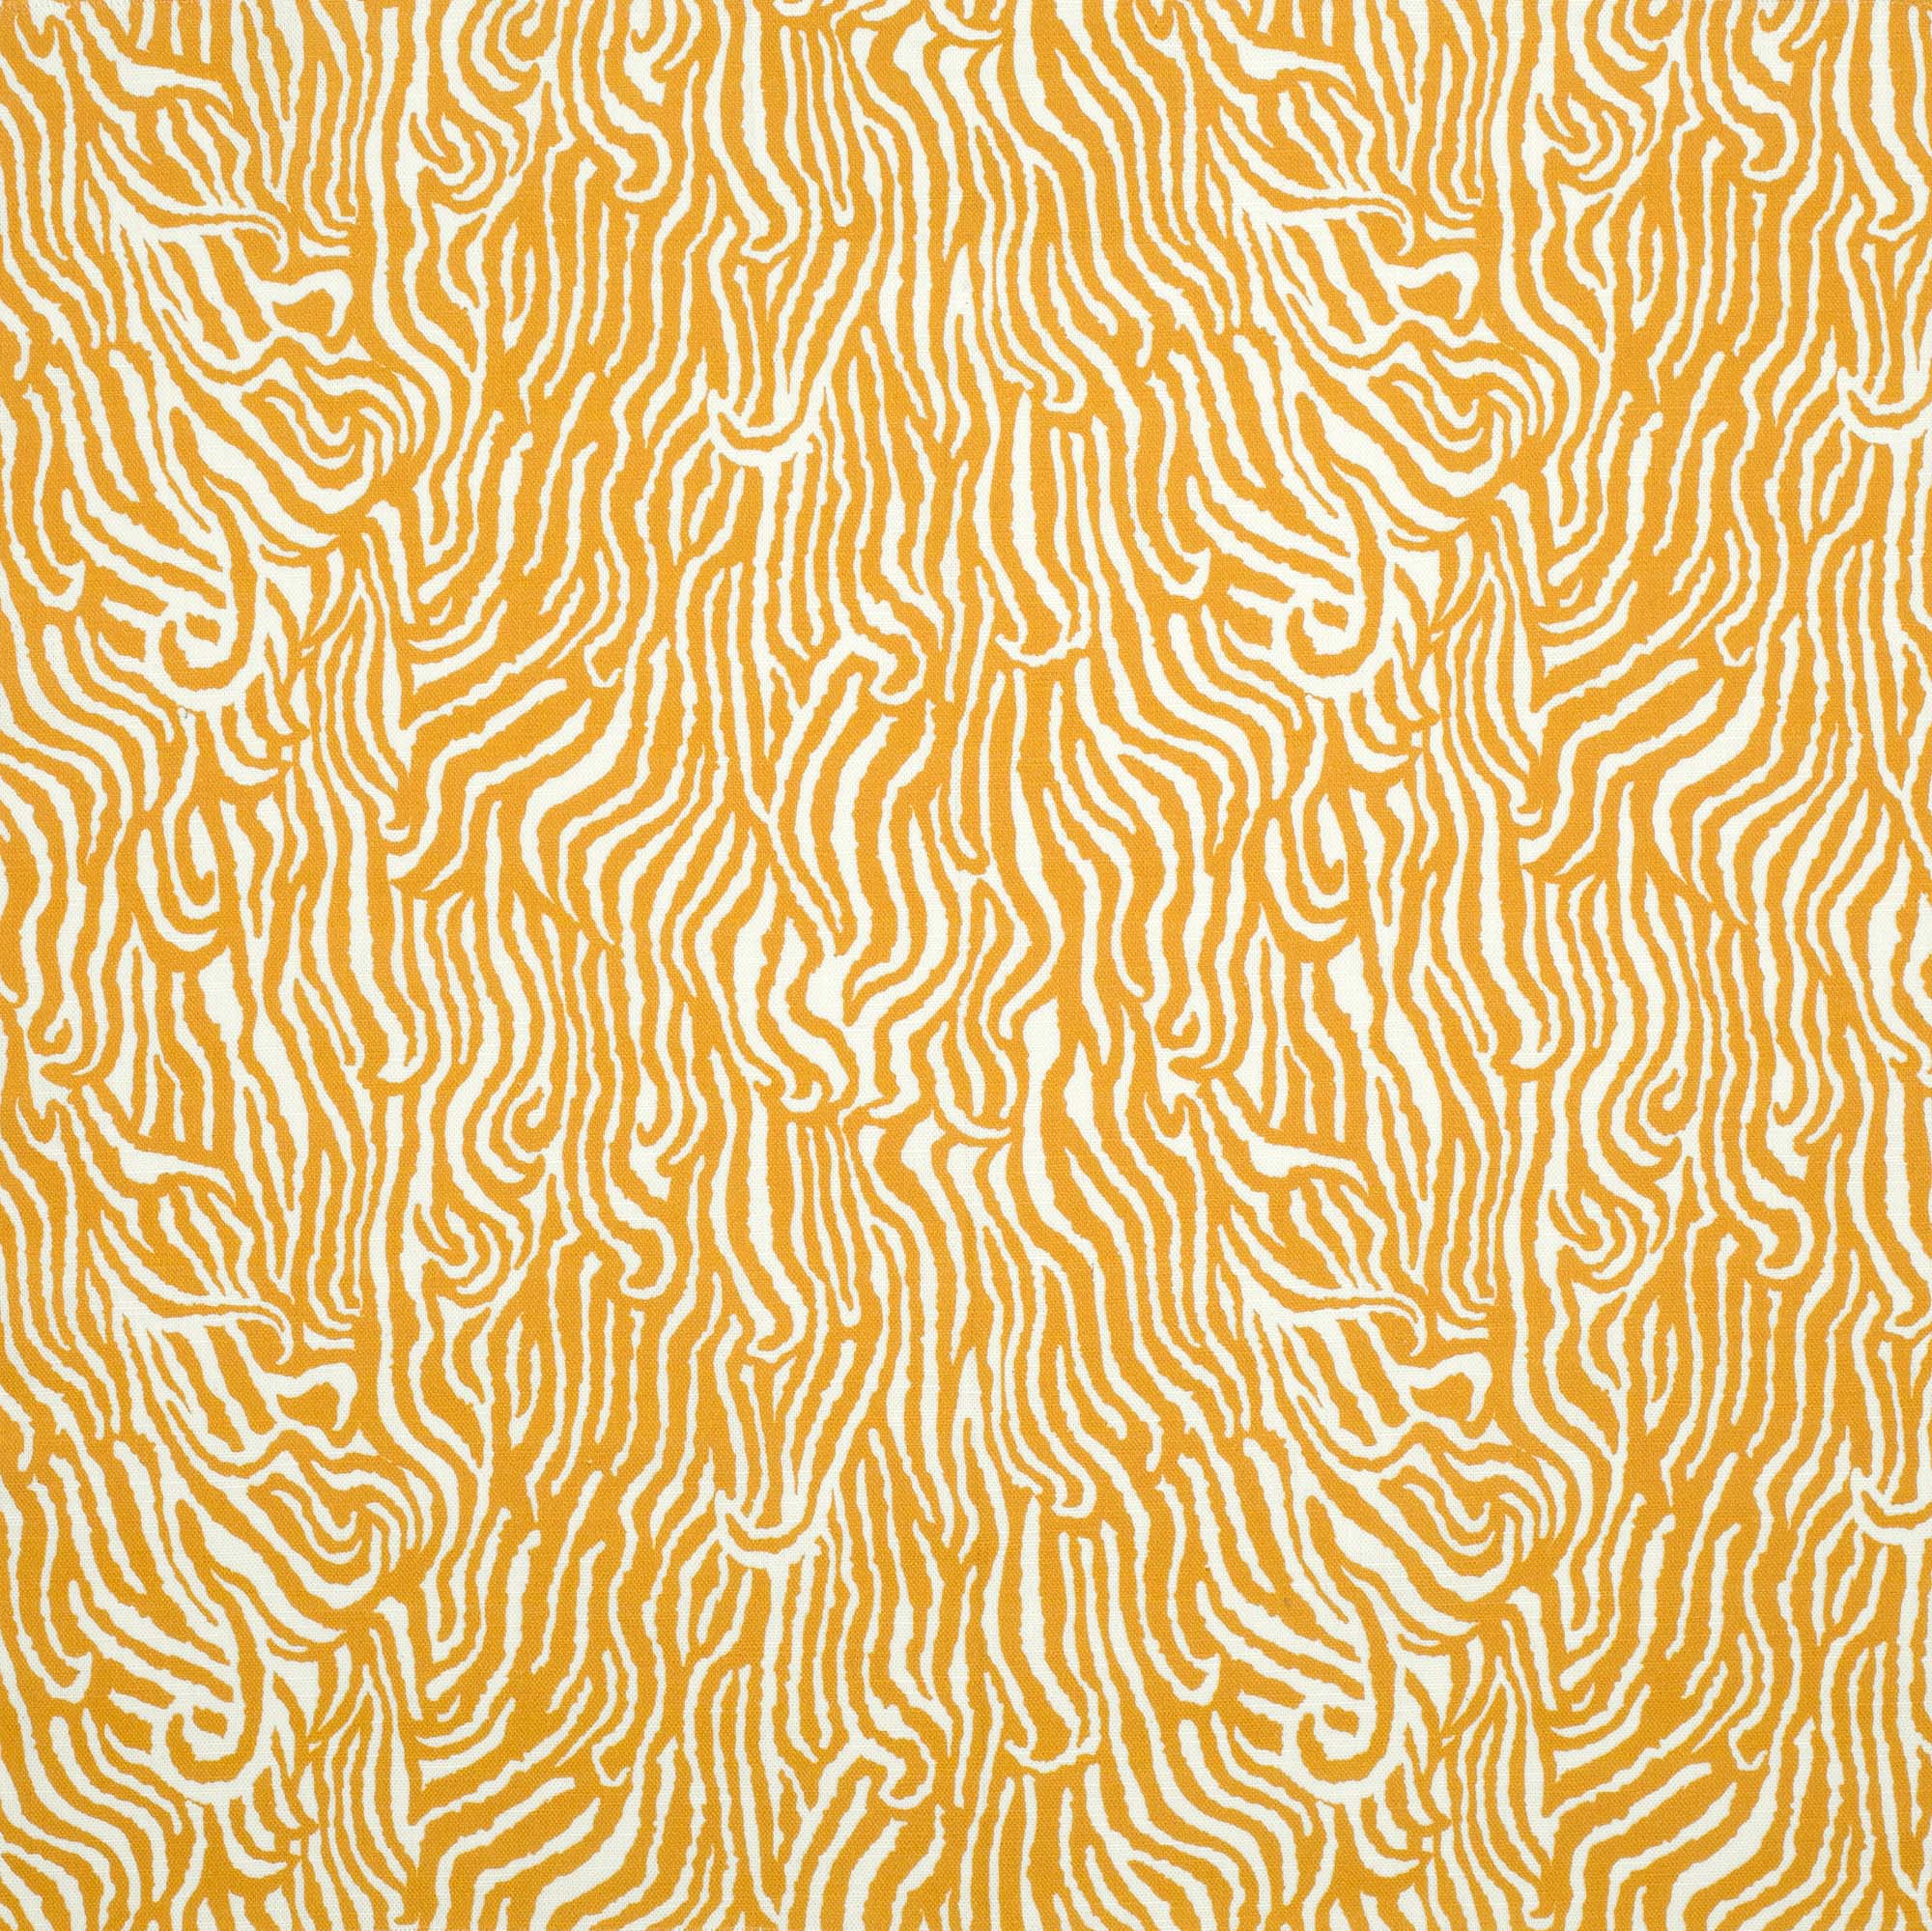 Detail of fabric in a playful animal print in light orange on a white field.